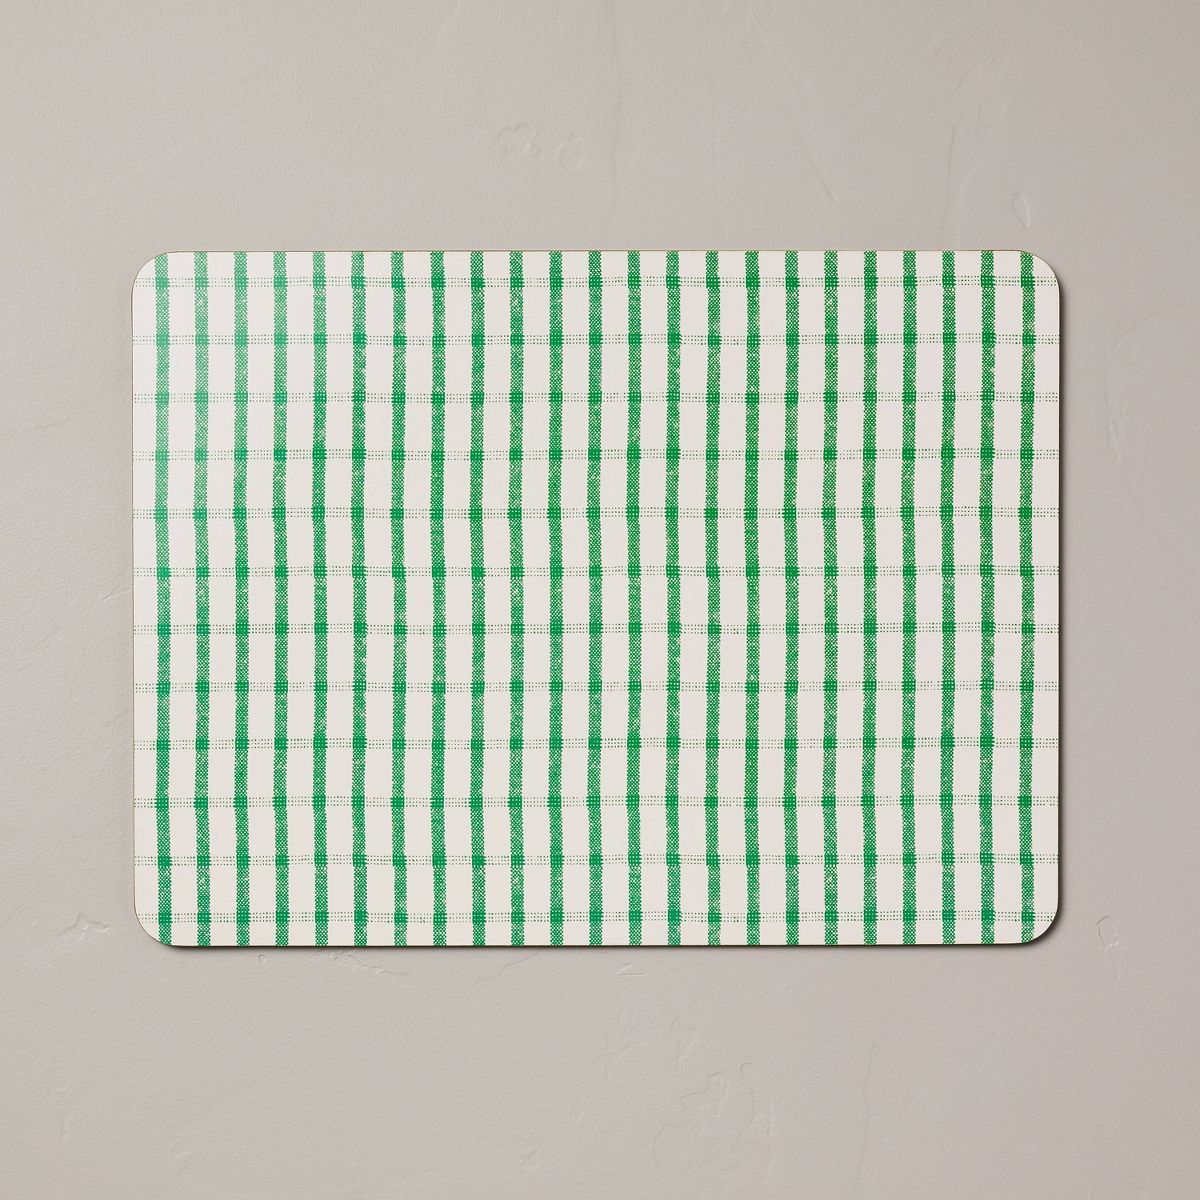 Checkered Plaid Wipeable Corkboard Placemat Green/Cream - Hearth & Hand™ with Magnolia | Target